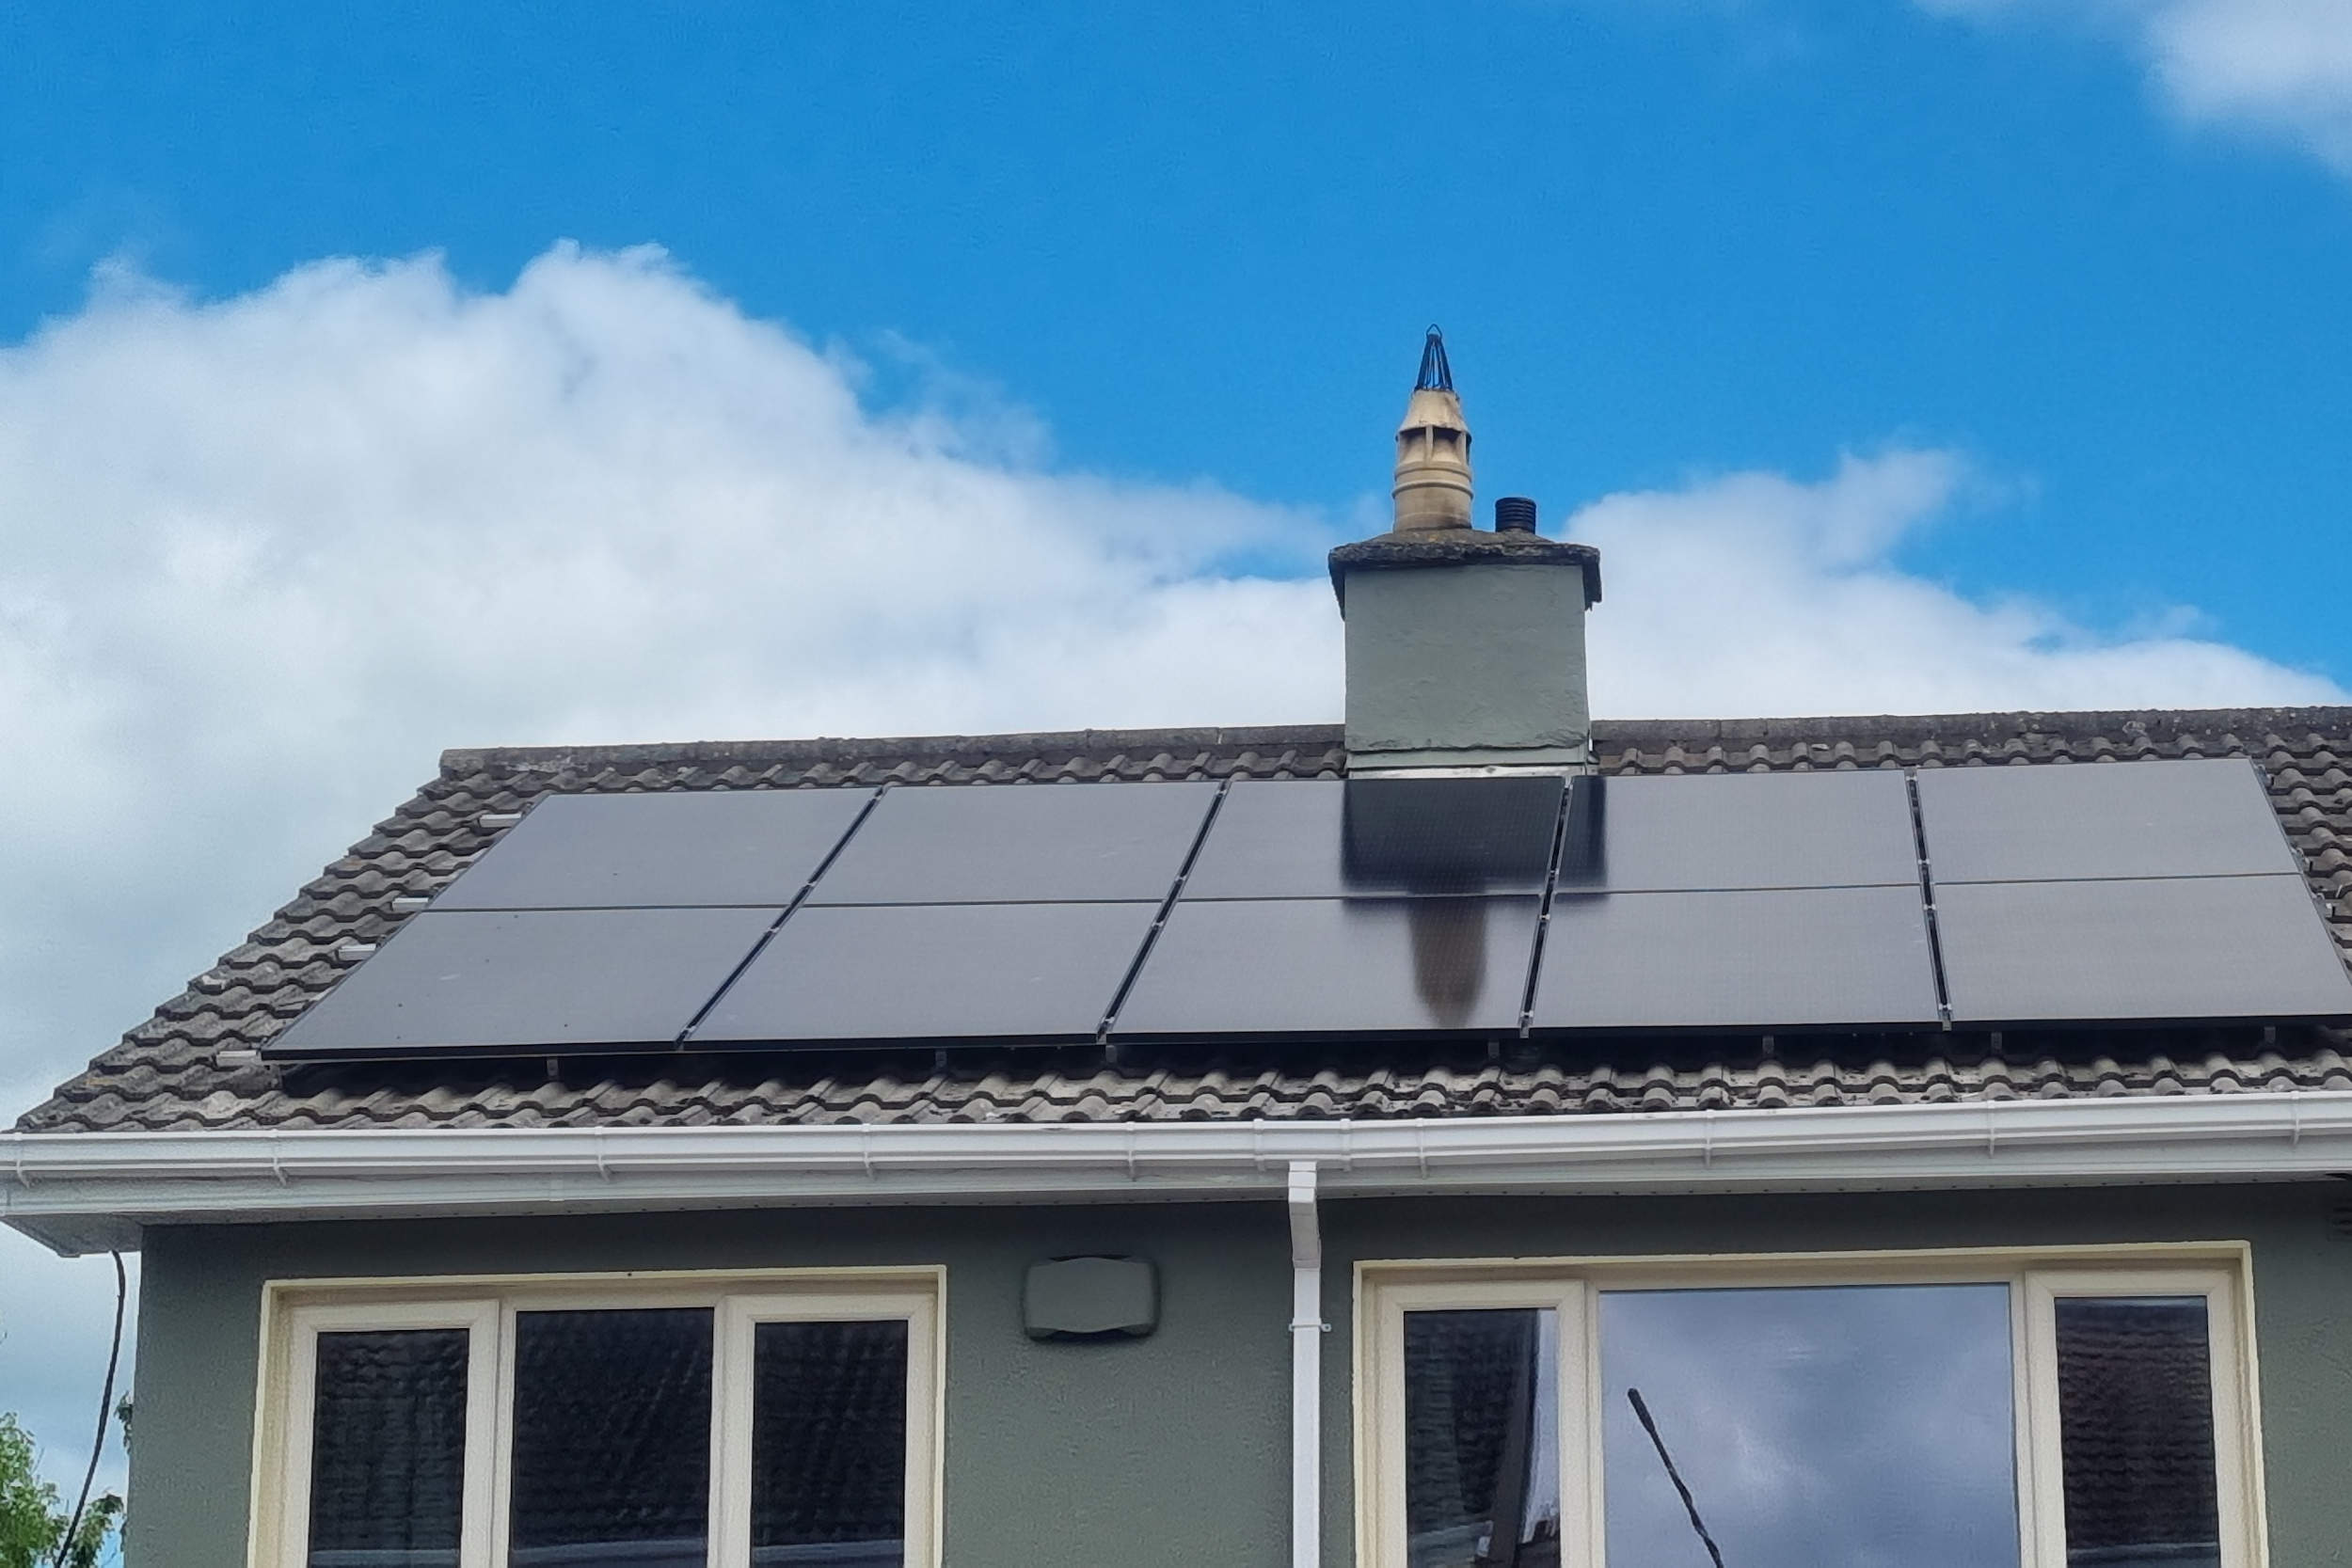 Semi detached house with solar panels on the roof